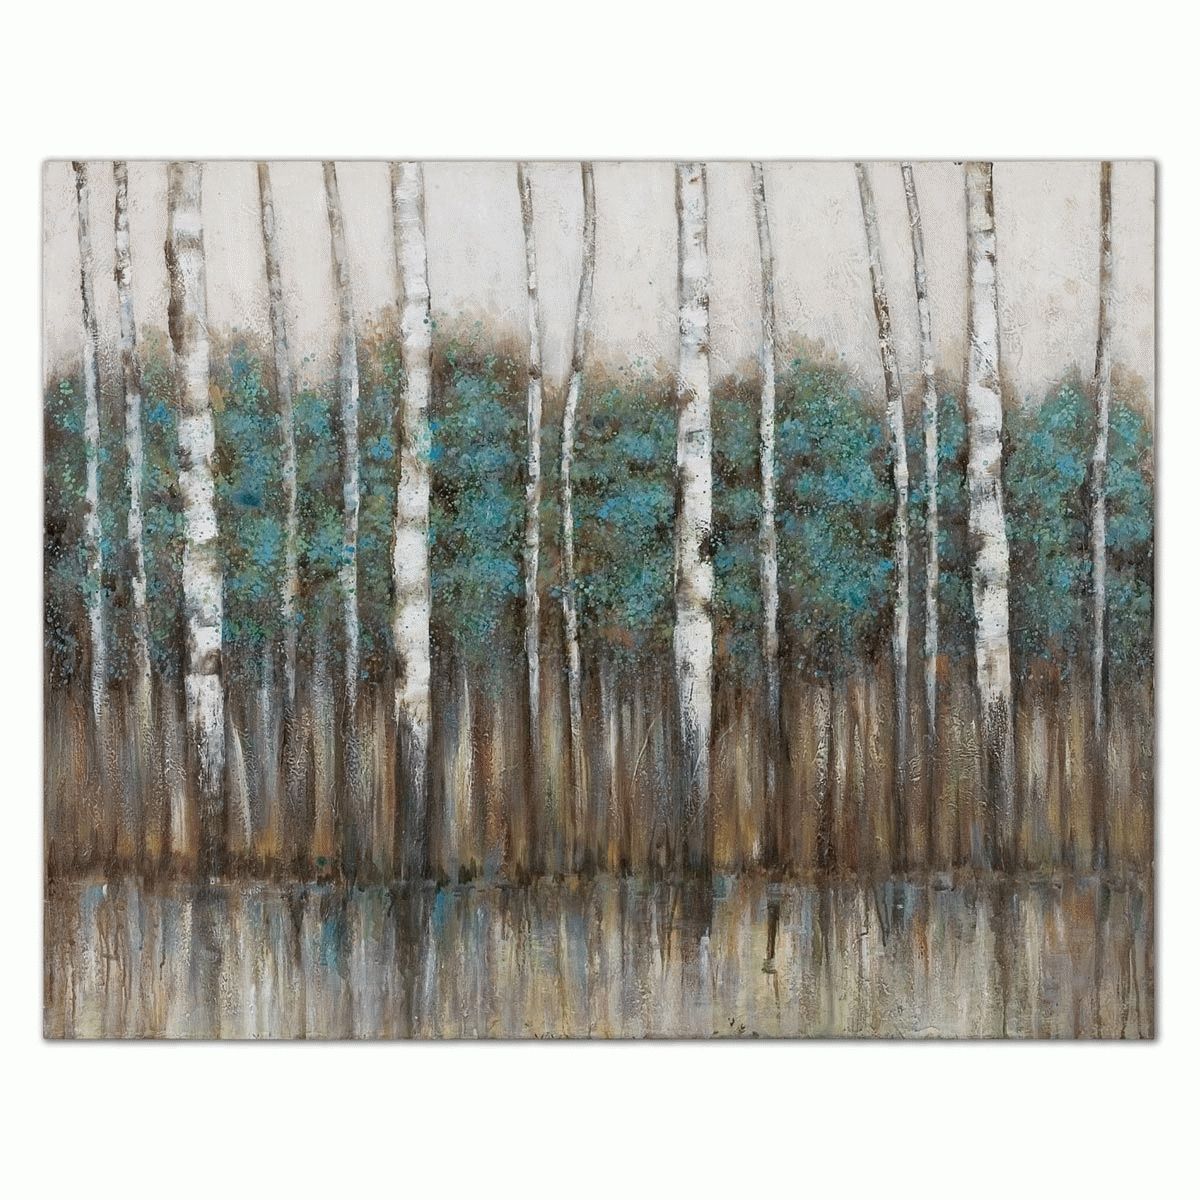 Brown And Turquoise Wall Art Within Latest Edge Of The Forest Canvas Wall Art (View 5 of 15)